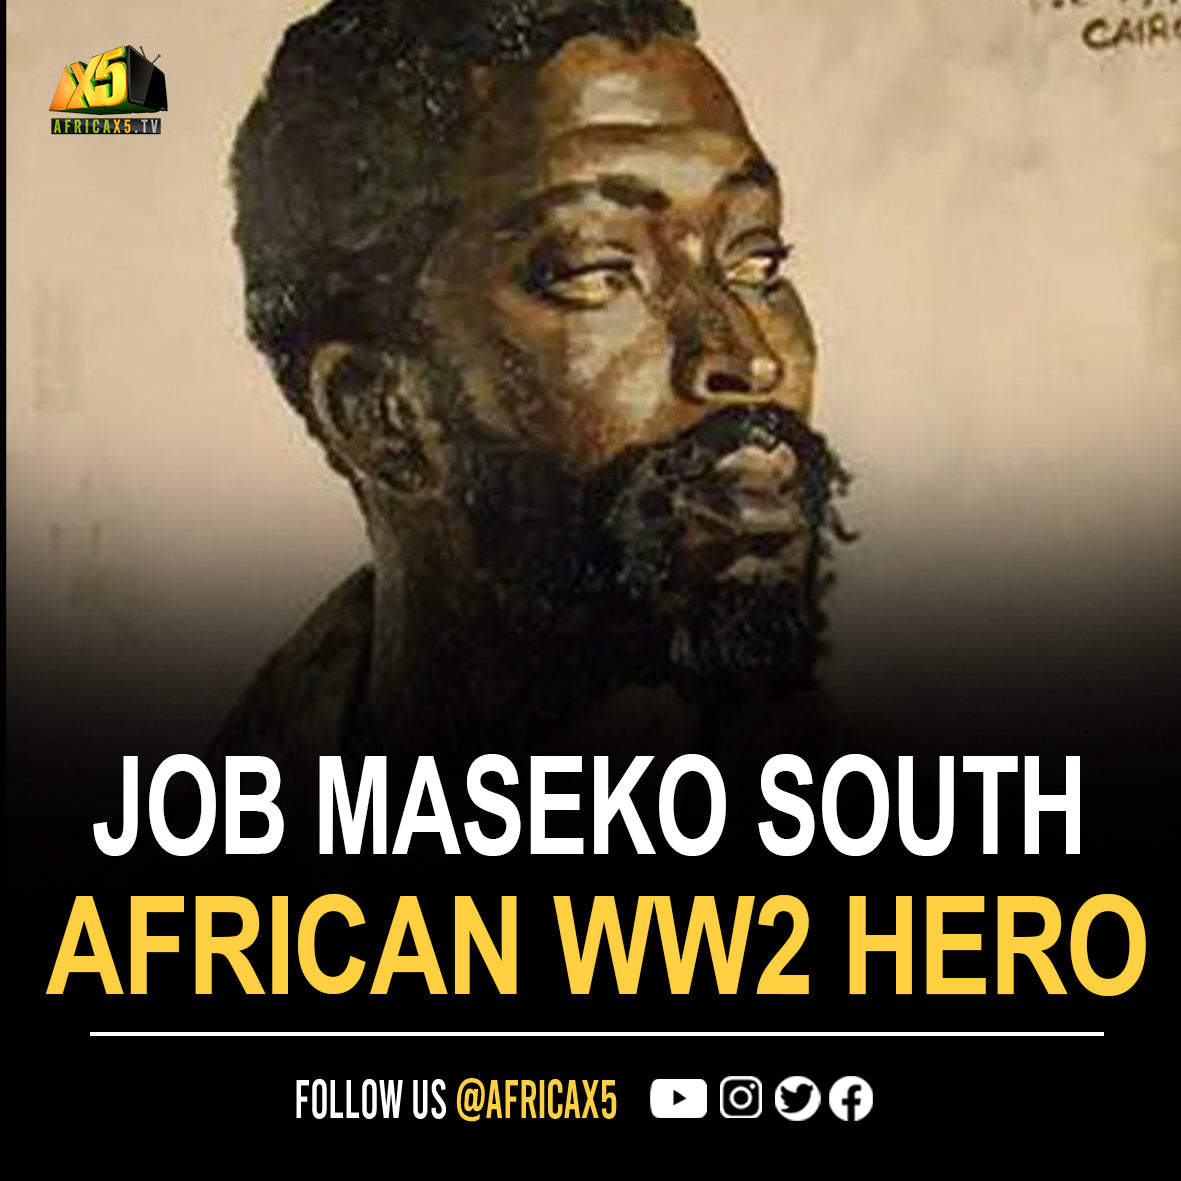 Job Maseko, a WW2 hero, sank a NAZI ship with a bomb made from a tin can with condensed milk. He was denied the highest military decoration, due to his race.